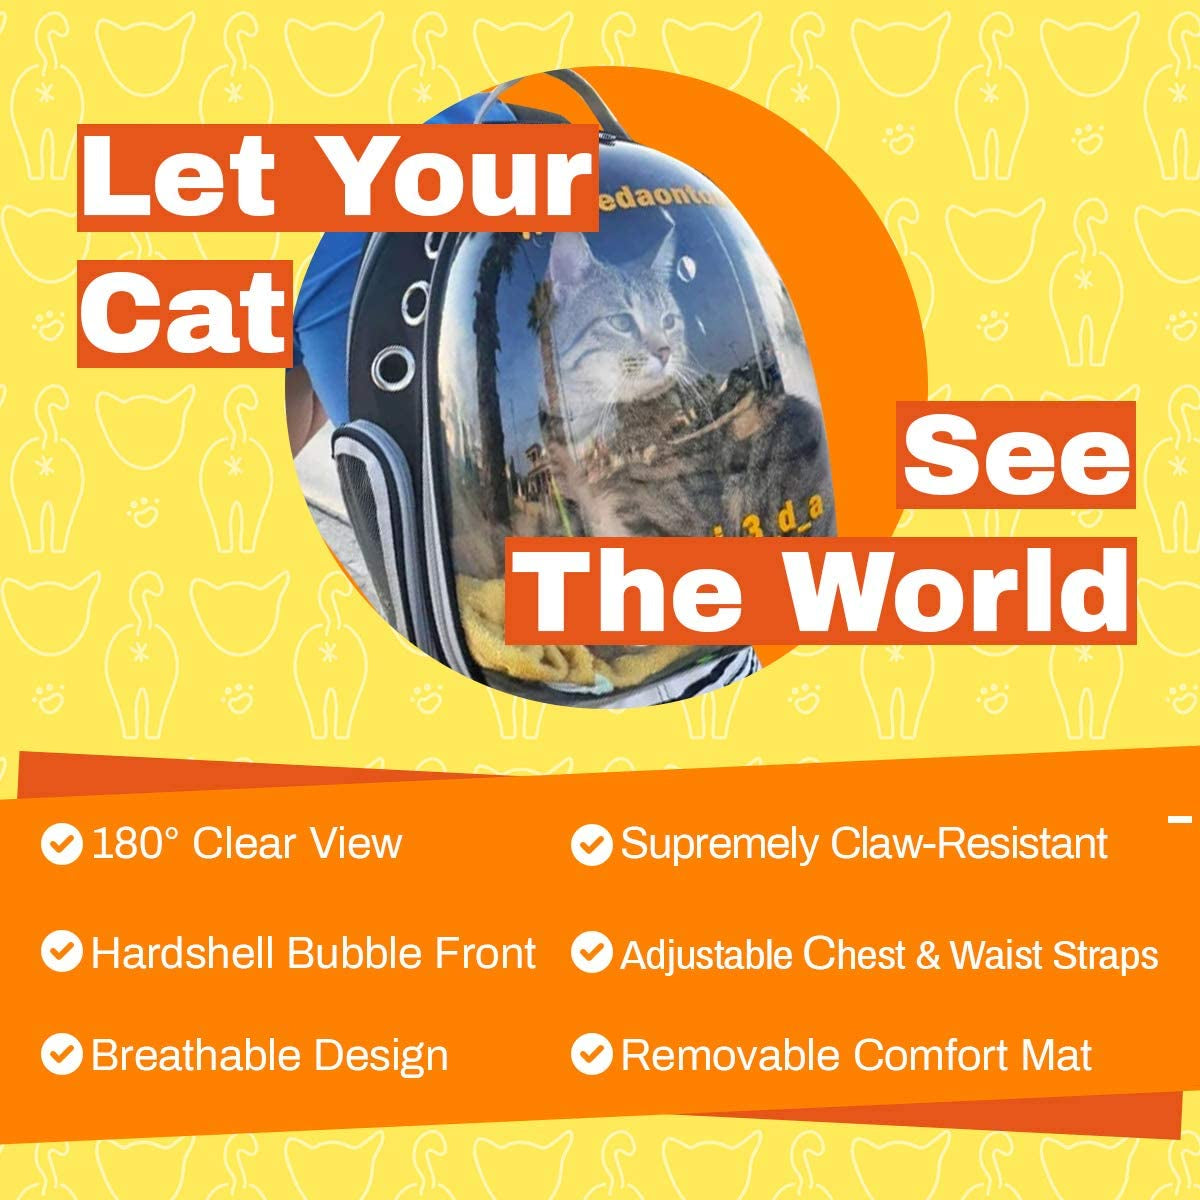 Carrier Bag - Premium Transparent Bubble Capsule Pet Carrier for Small, Medium Cats - Airline Approved Cat Bubble Backpack with Removable Mat, Side Pocket and Adjustable Straps